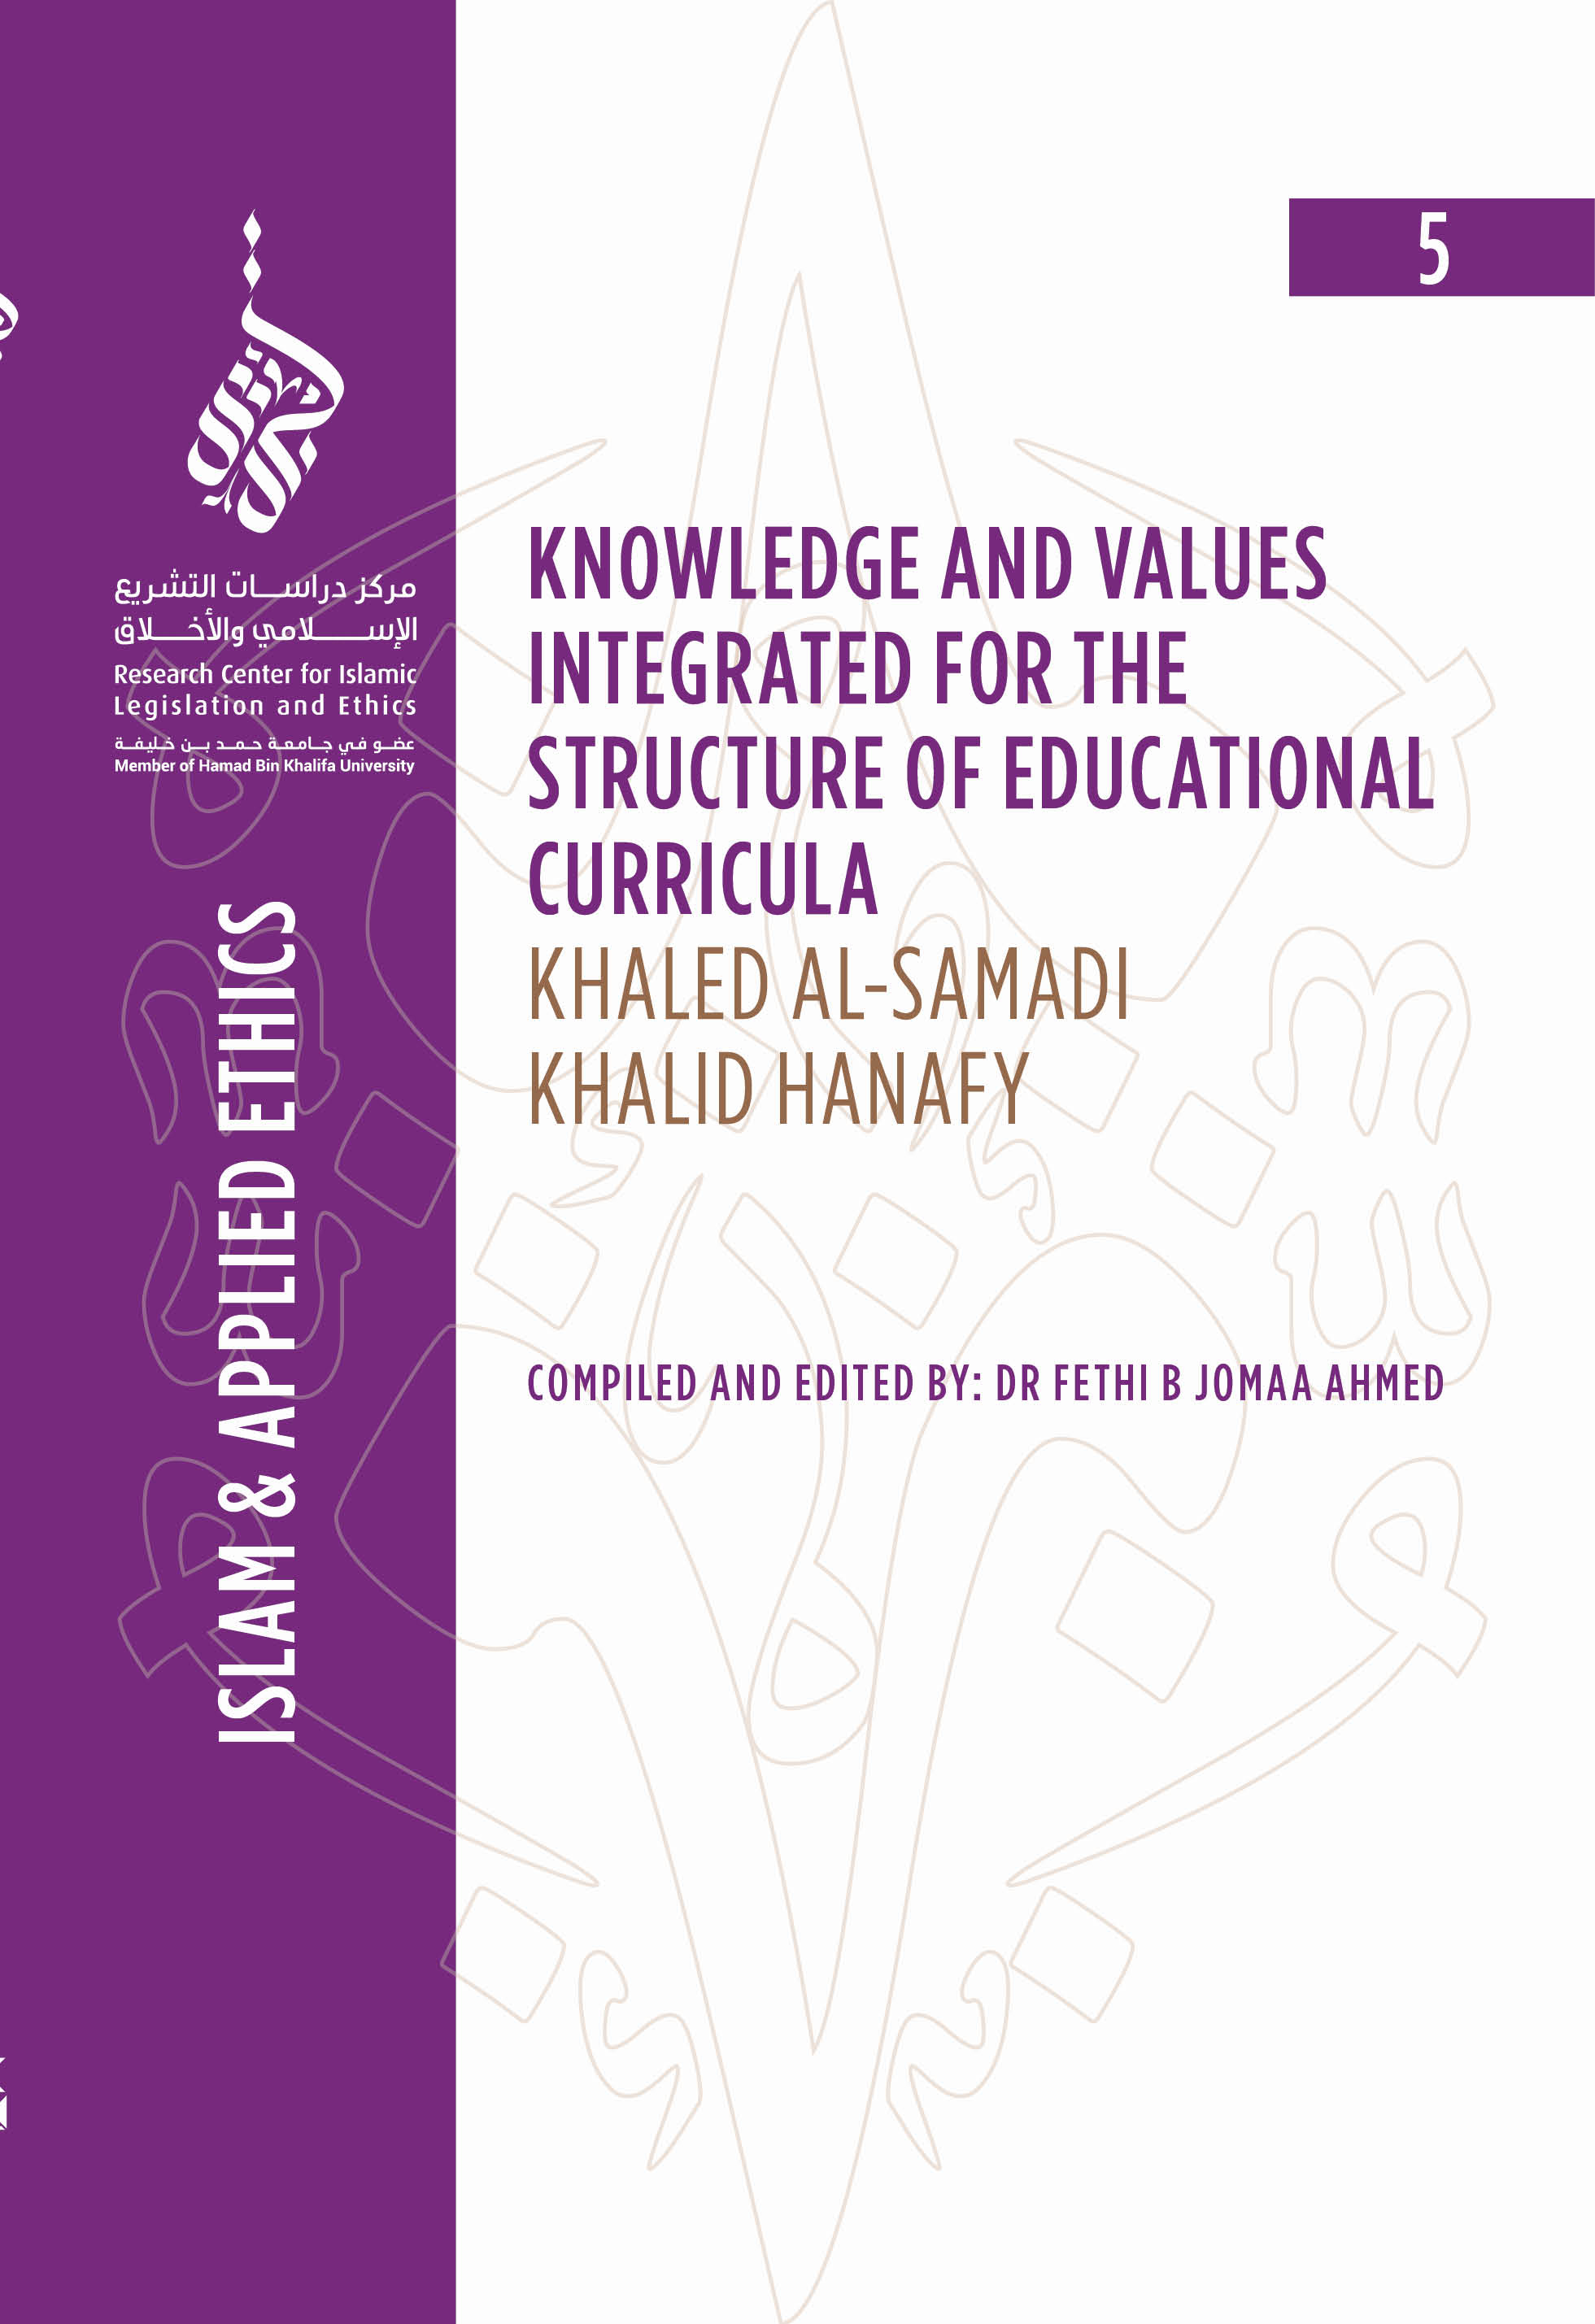 image of The Optimal Method for Getting Natural and Social Sciences Integrated into Islamic Studies Programs